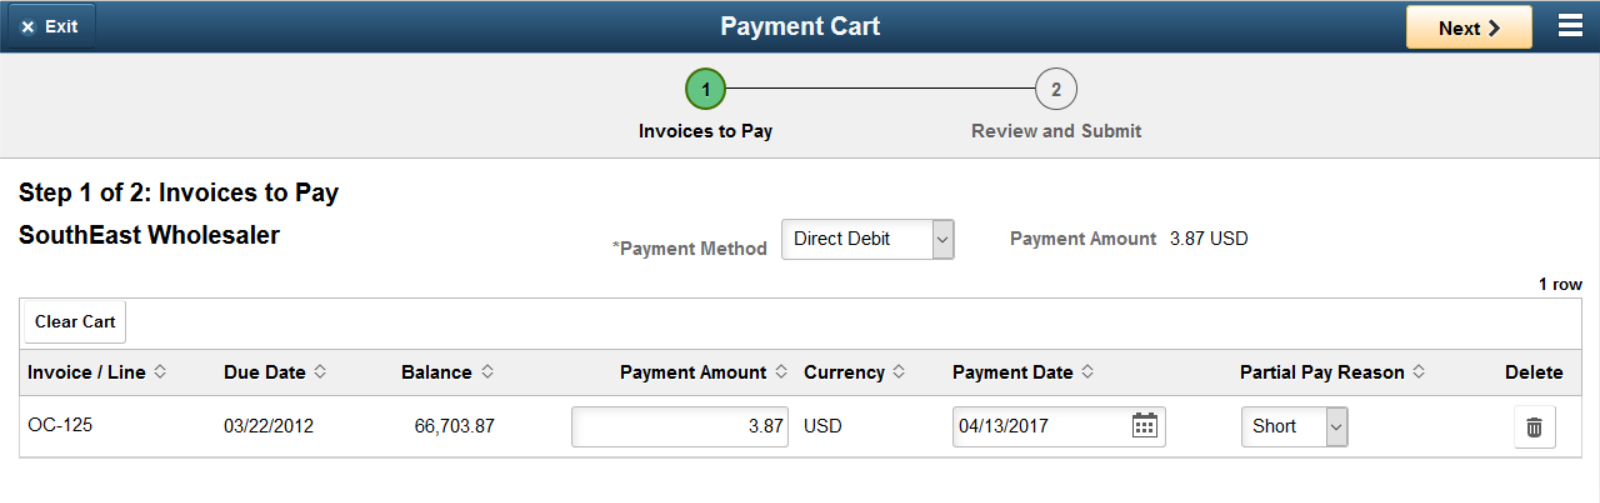 Step 1 of 2: Invoices to Pay page, using direct debit payment method (LFF)